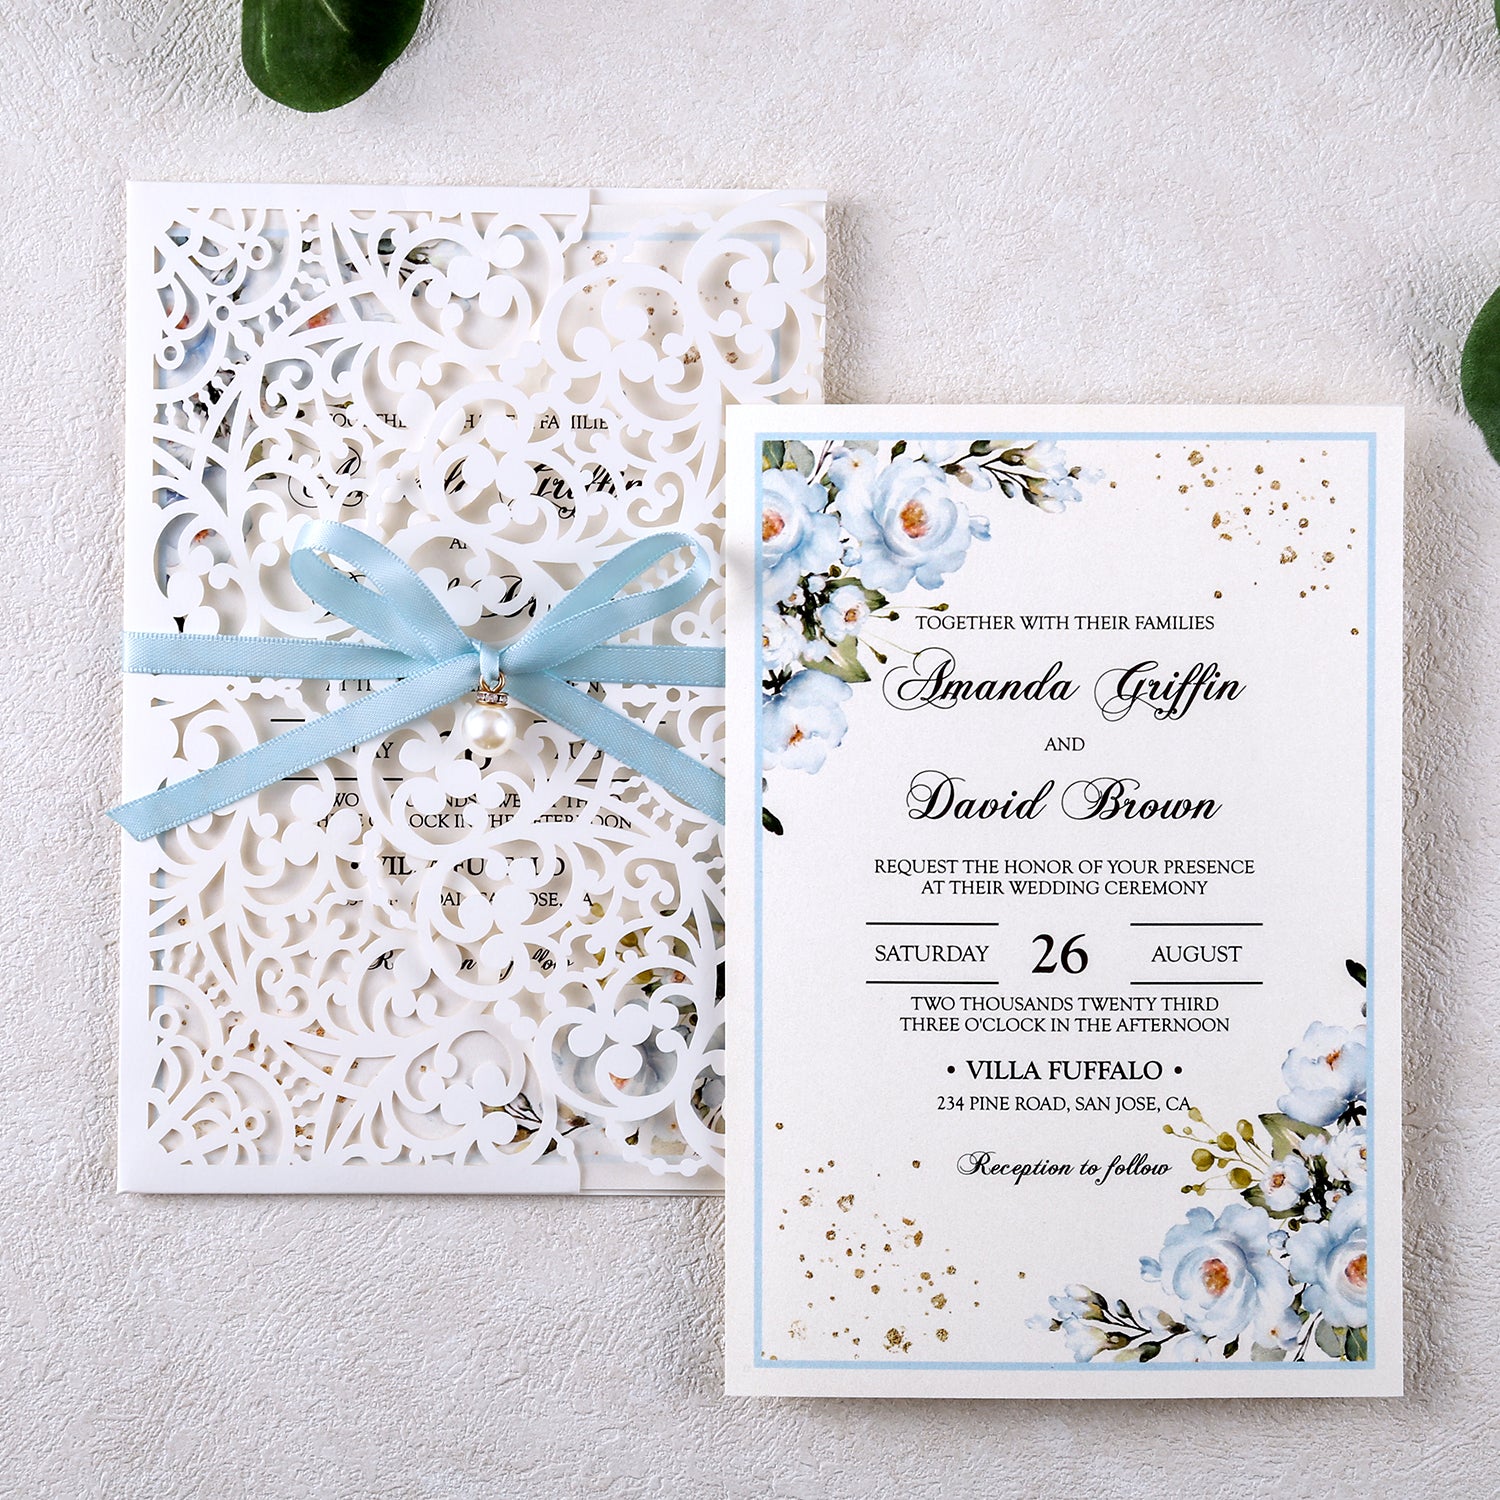 5 X 7.2" Laser Cut Hollow Rose Wedding invitations Cards With Blue Ribbon And Envelopes For Wedding - DorisHome